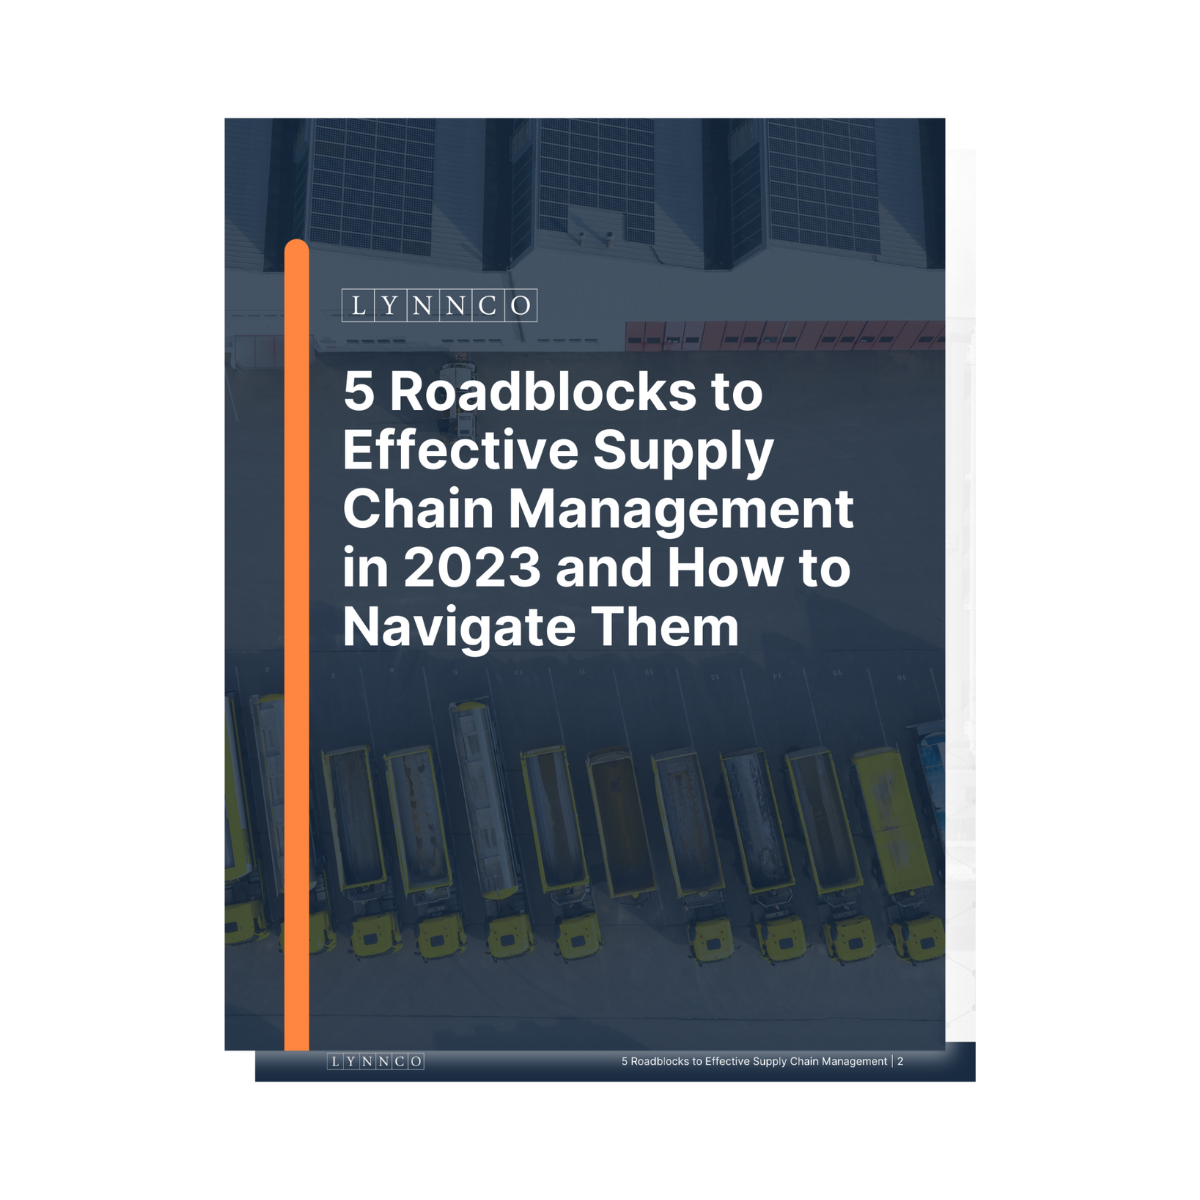 _5 Roadblocks to Effective Supply Chain Management in 2023 and How to Navigate Them_graphic